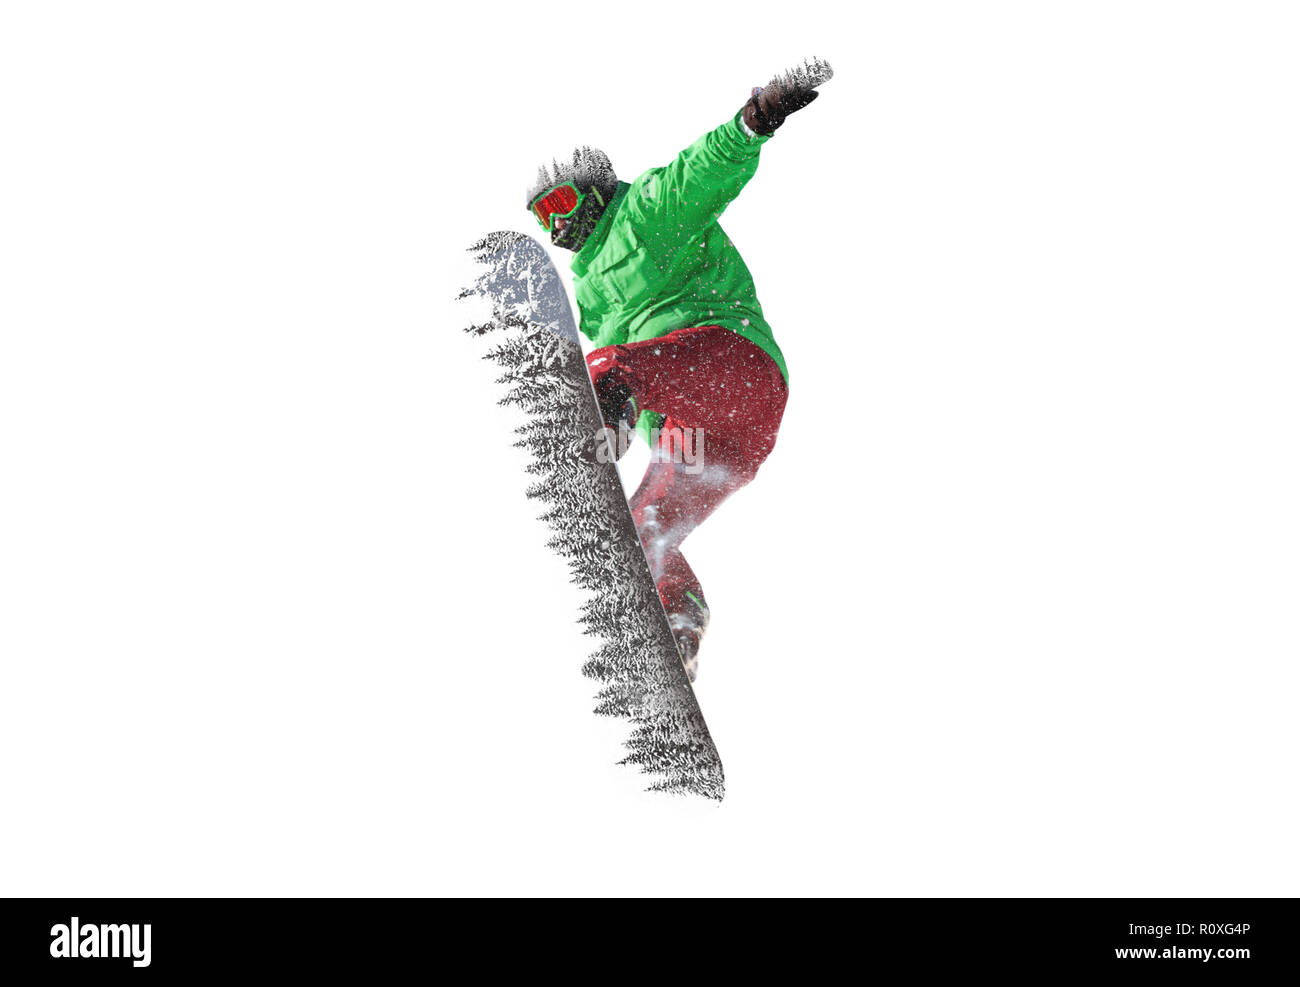 Snowboarder jumps in forest. Freeride snowboarding or ski resort concept Stock Photo